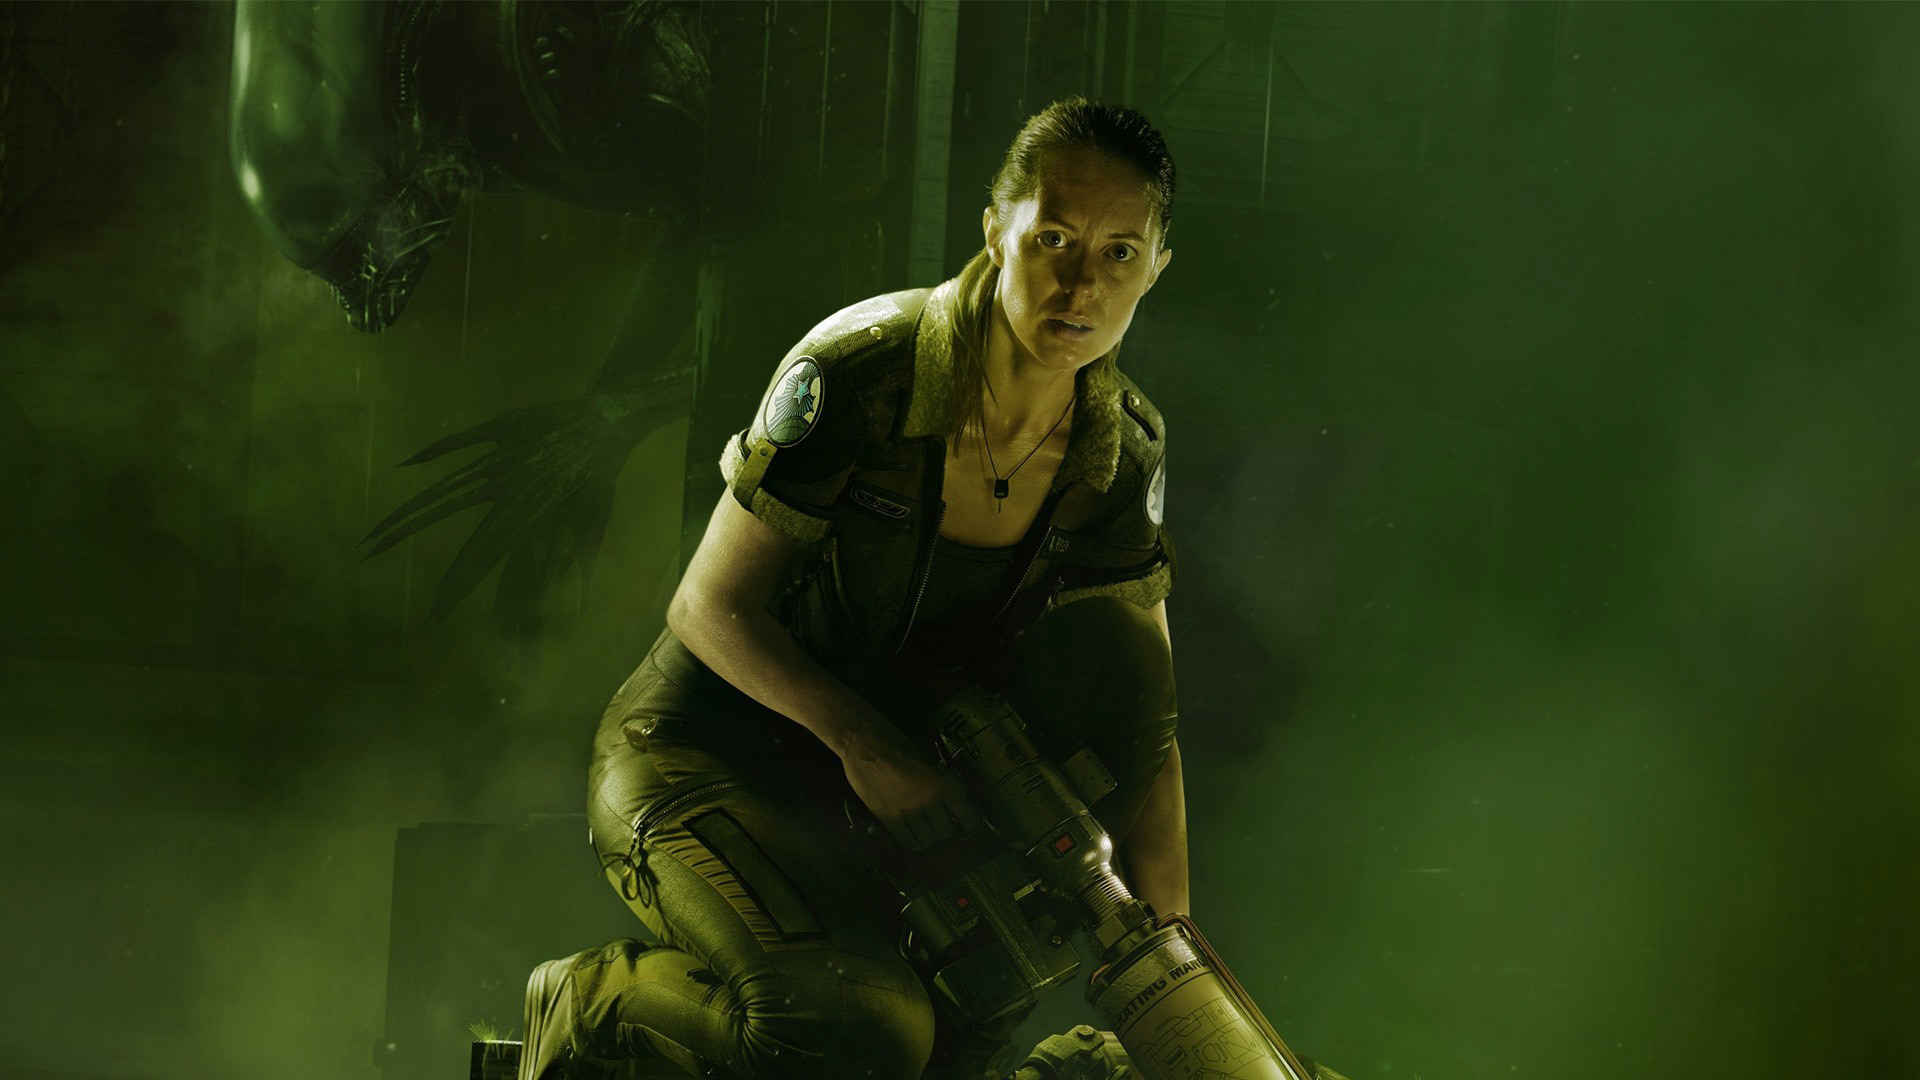 1920x1080 Alien Isolation Wallpapers High Quality